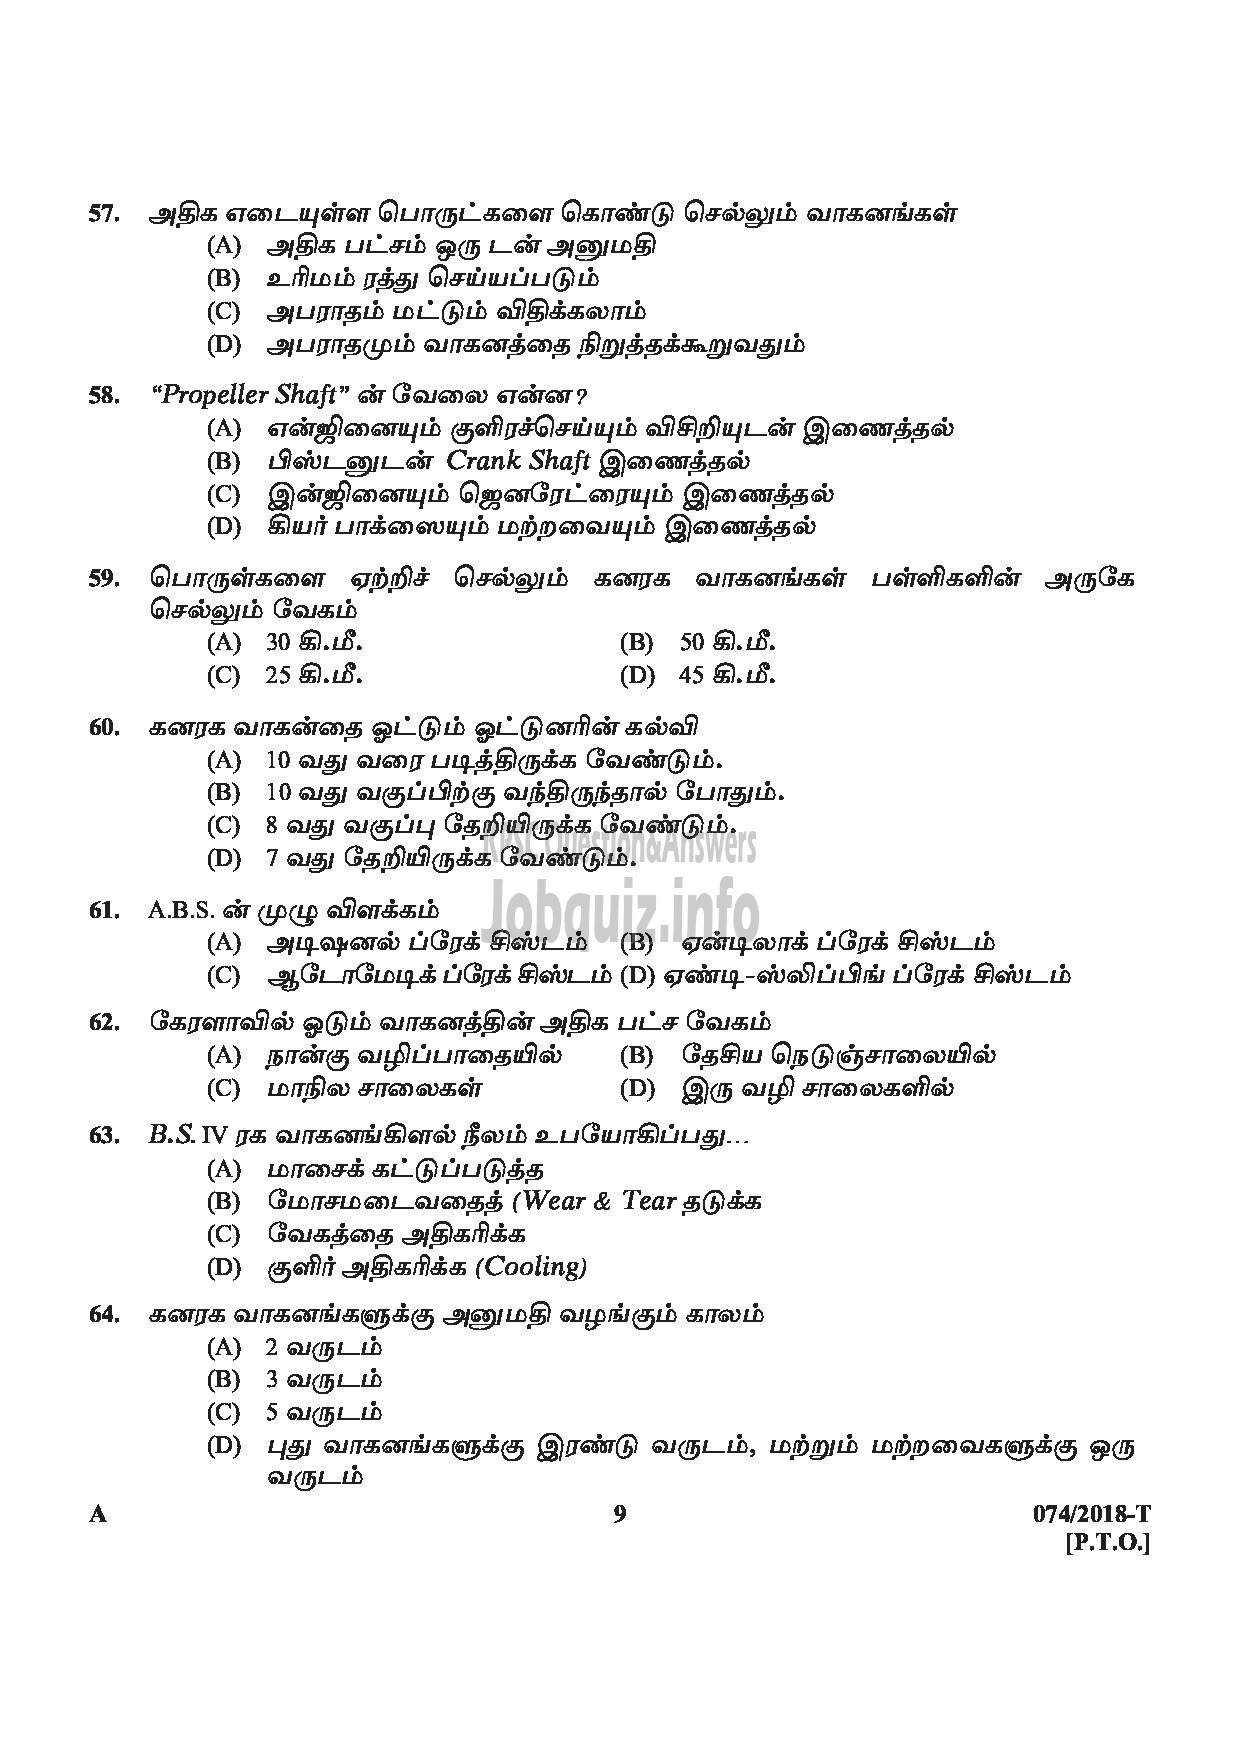 Kerala PSC Question Paper - Police Constable Driver (Armed Police Battalion) Department : Police Medium of Question : Tamil-9